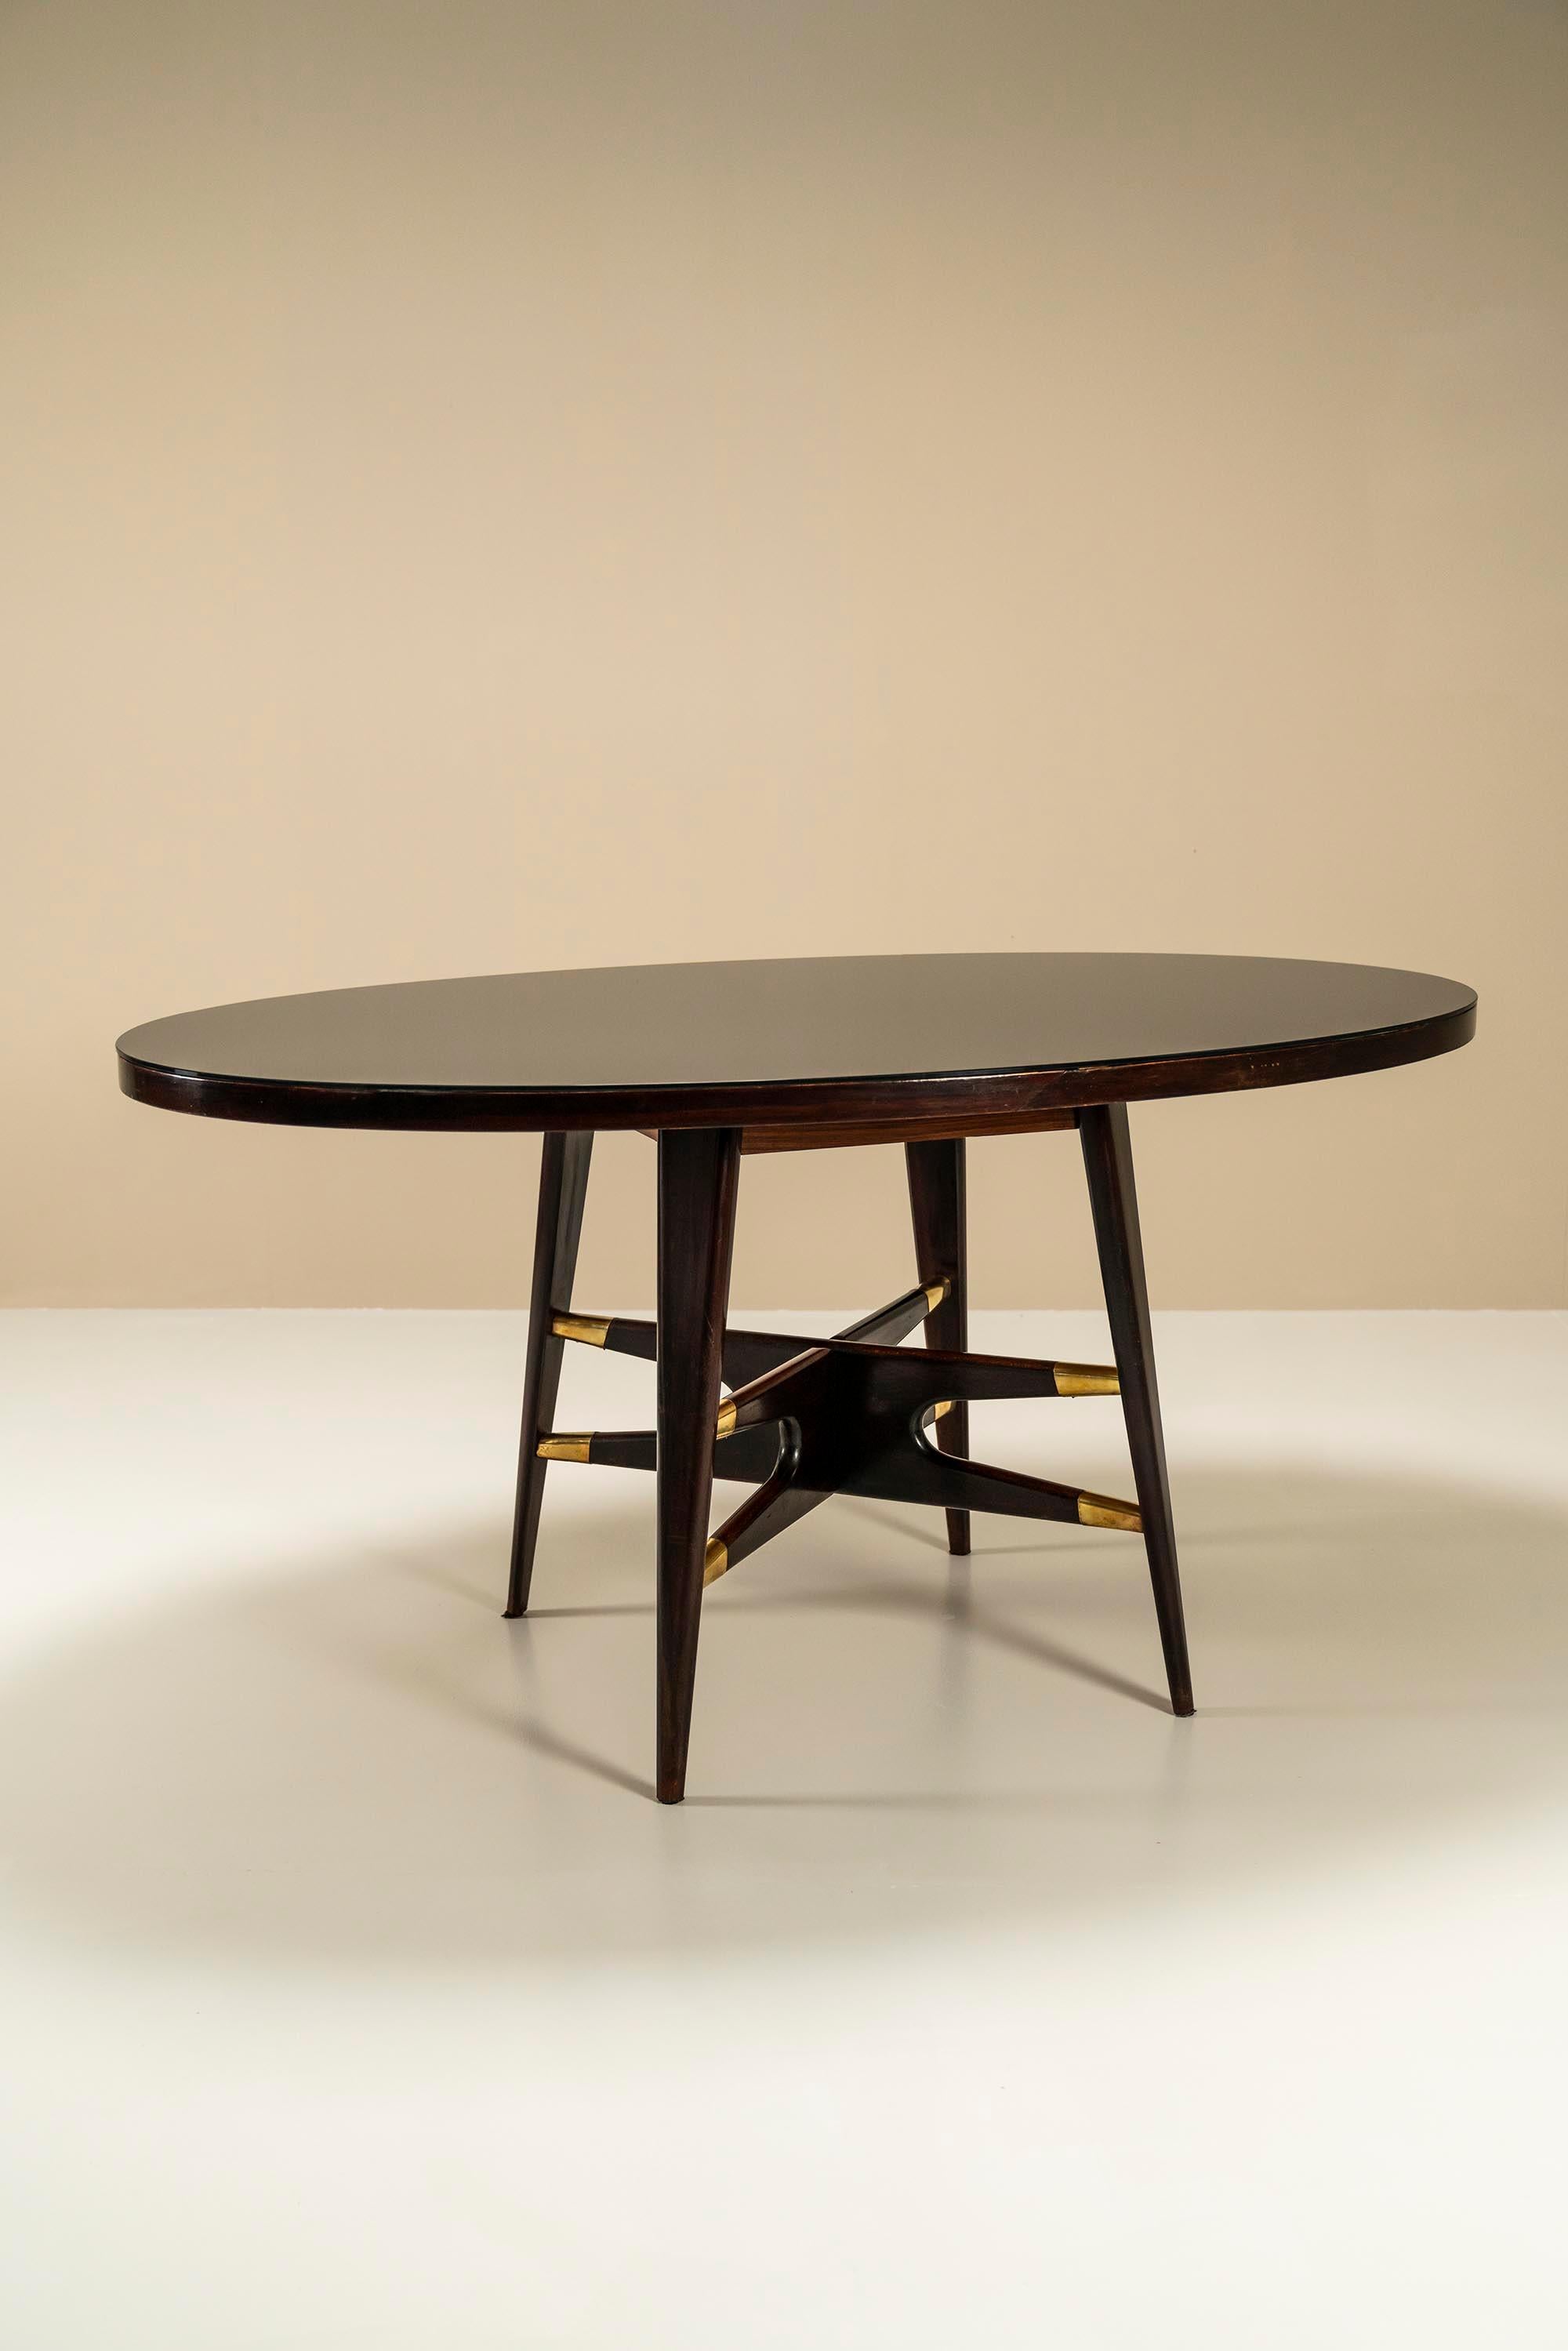 A very chic and very stylish appearance is what we first want to mention about this 1950s dining table by Italian designer Silvio Cavatorta. One of the greater Italian designers who rose to fame with his designs during the 1950s. Typical for his